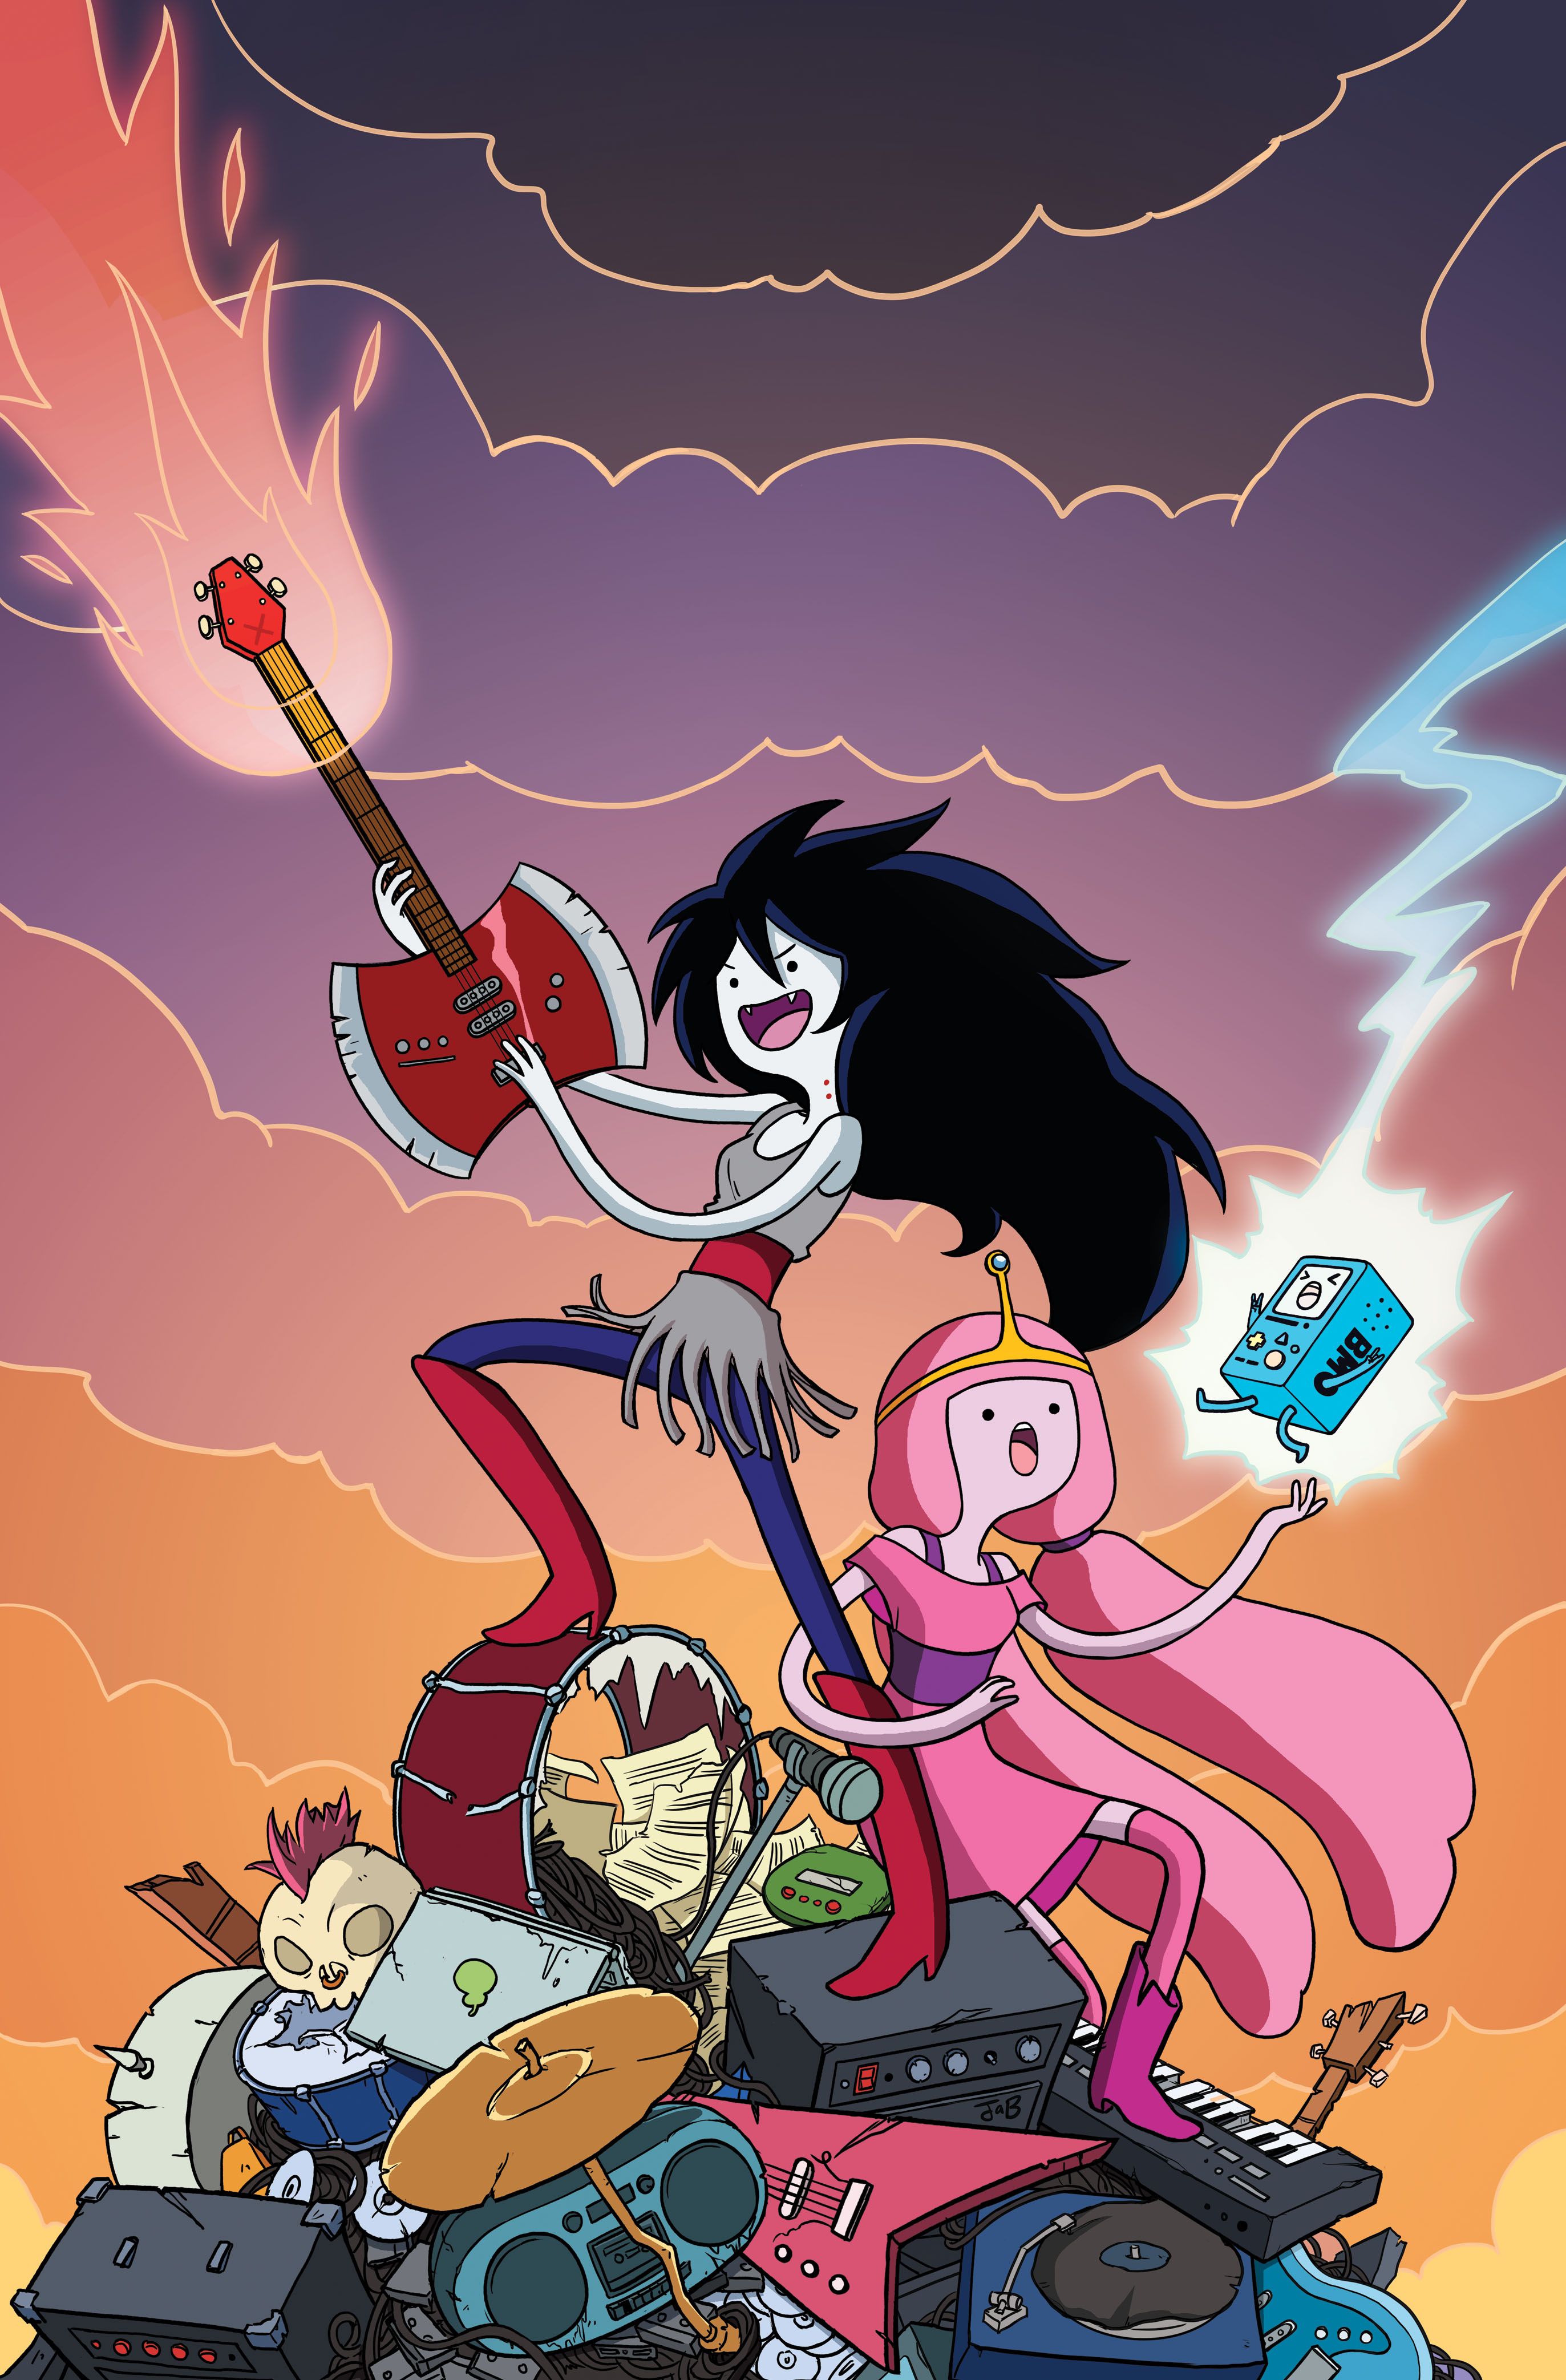 Marceline picture and jokes - adventure time - fandoms / funny picture & best jokes: comics, image, video, humor, gif animation lol'd